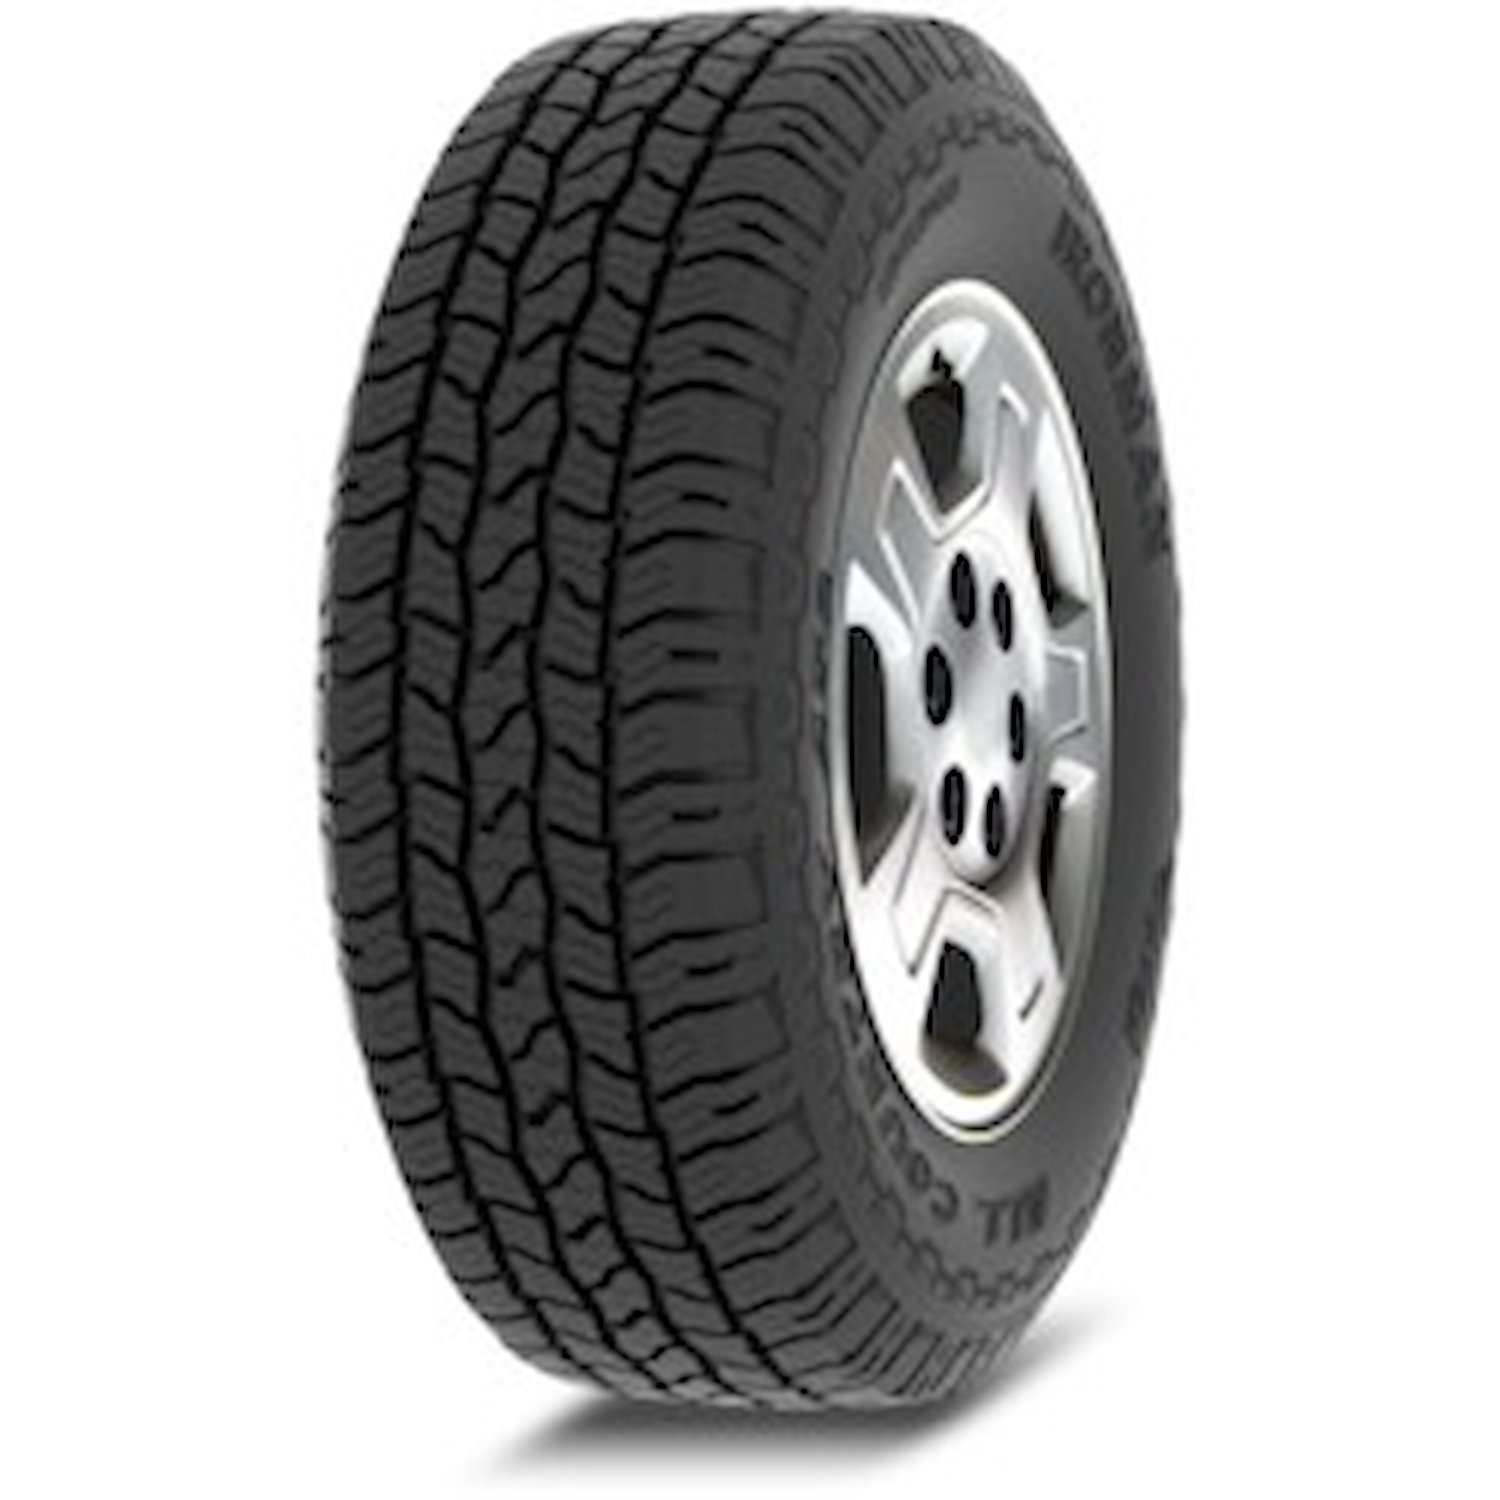 07670 All Country AT2 Tire, LT245/70R17, 119/116S